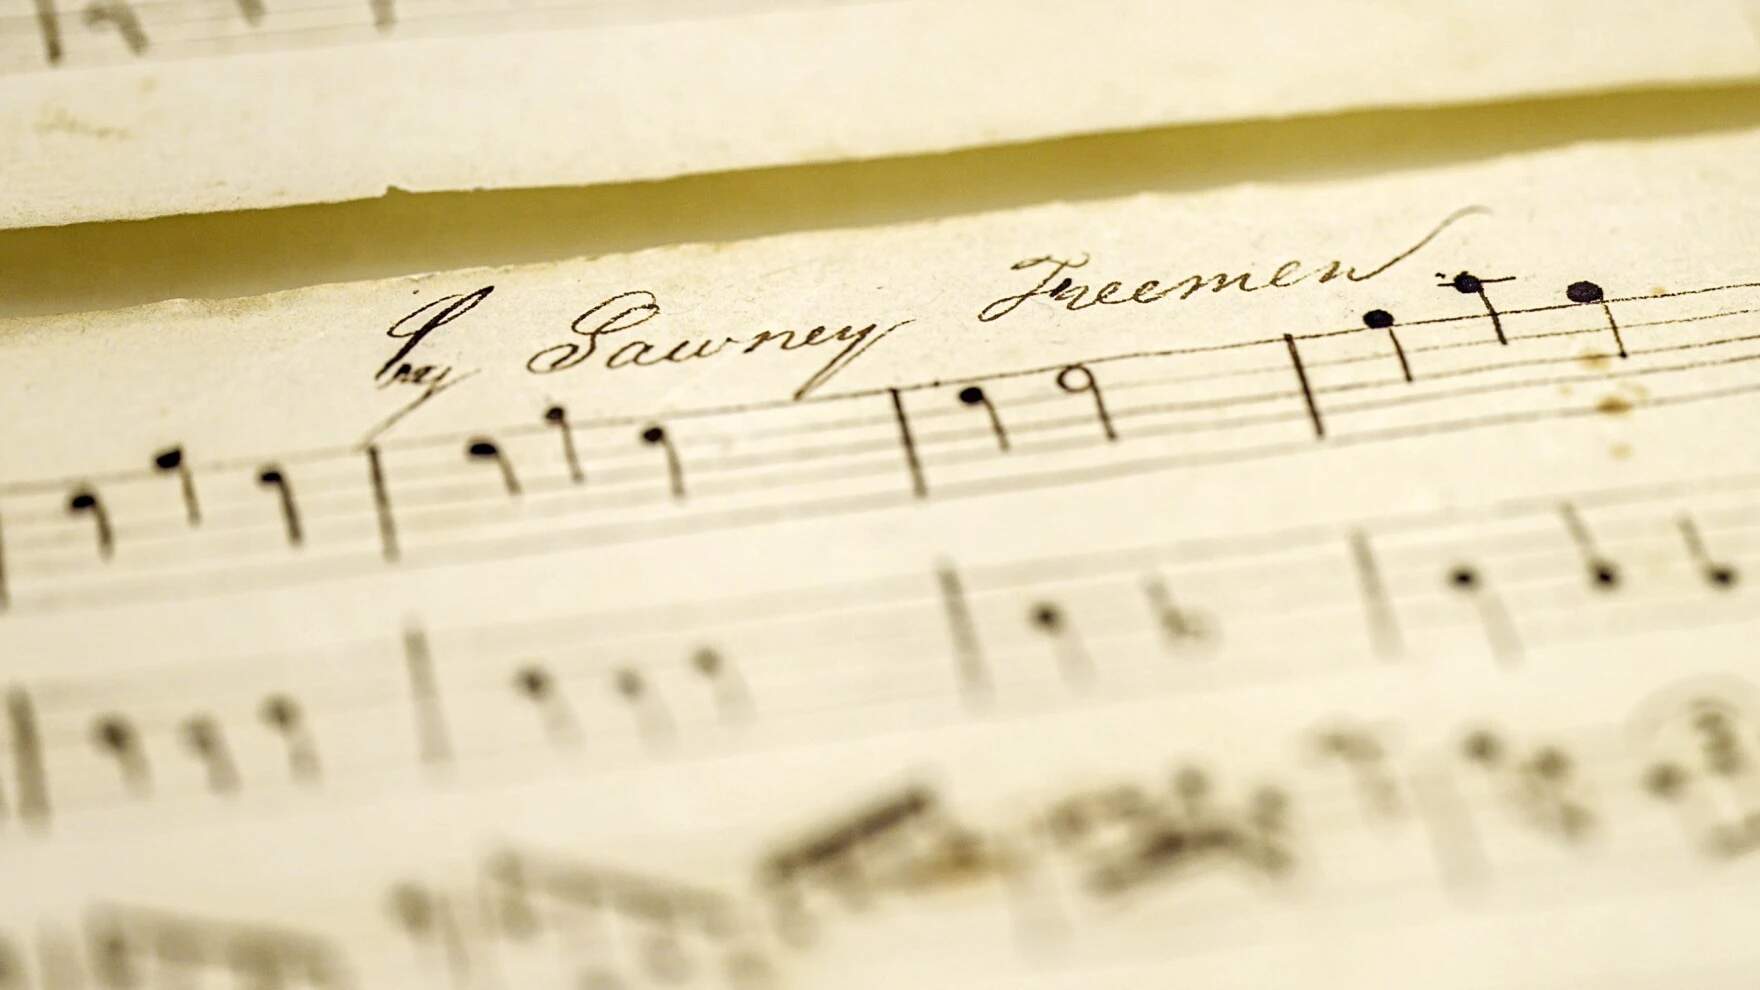 An 1817 manuscript of music composed by Sawney Freeman is in the archive of Trinity's Watkinson Library. Researchers believe Freeman, one of the earliest known Black American composers, was born into slavery in Lyme, Connecticut, ran away in 1790 and was emancipated in 1793. (Dave Wurtzel/Connecticut Public)